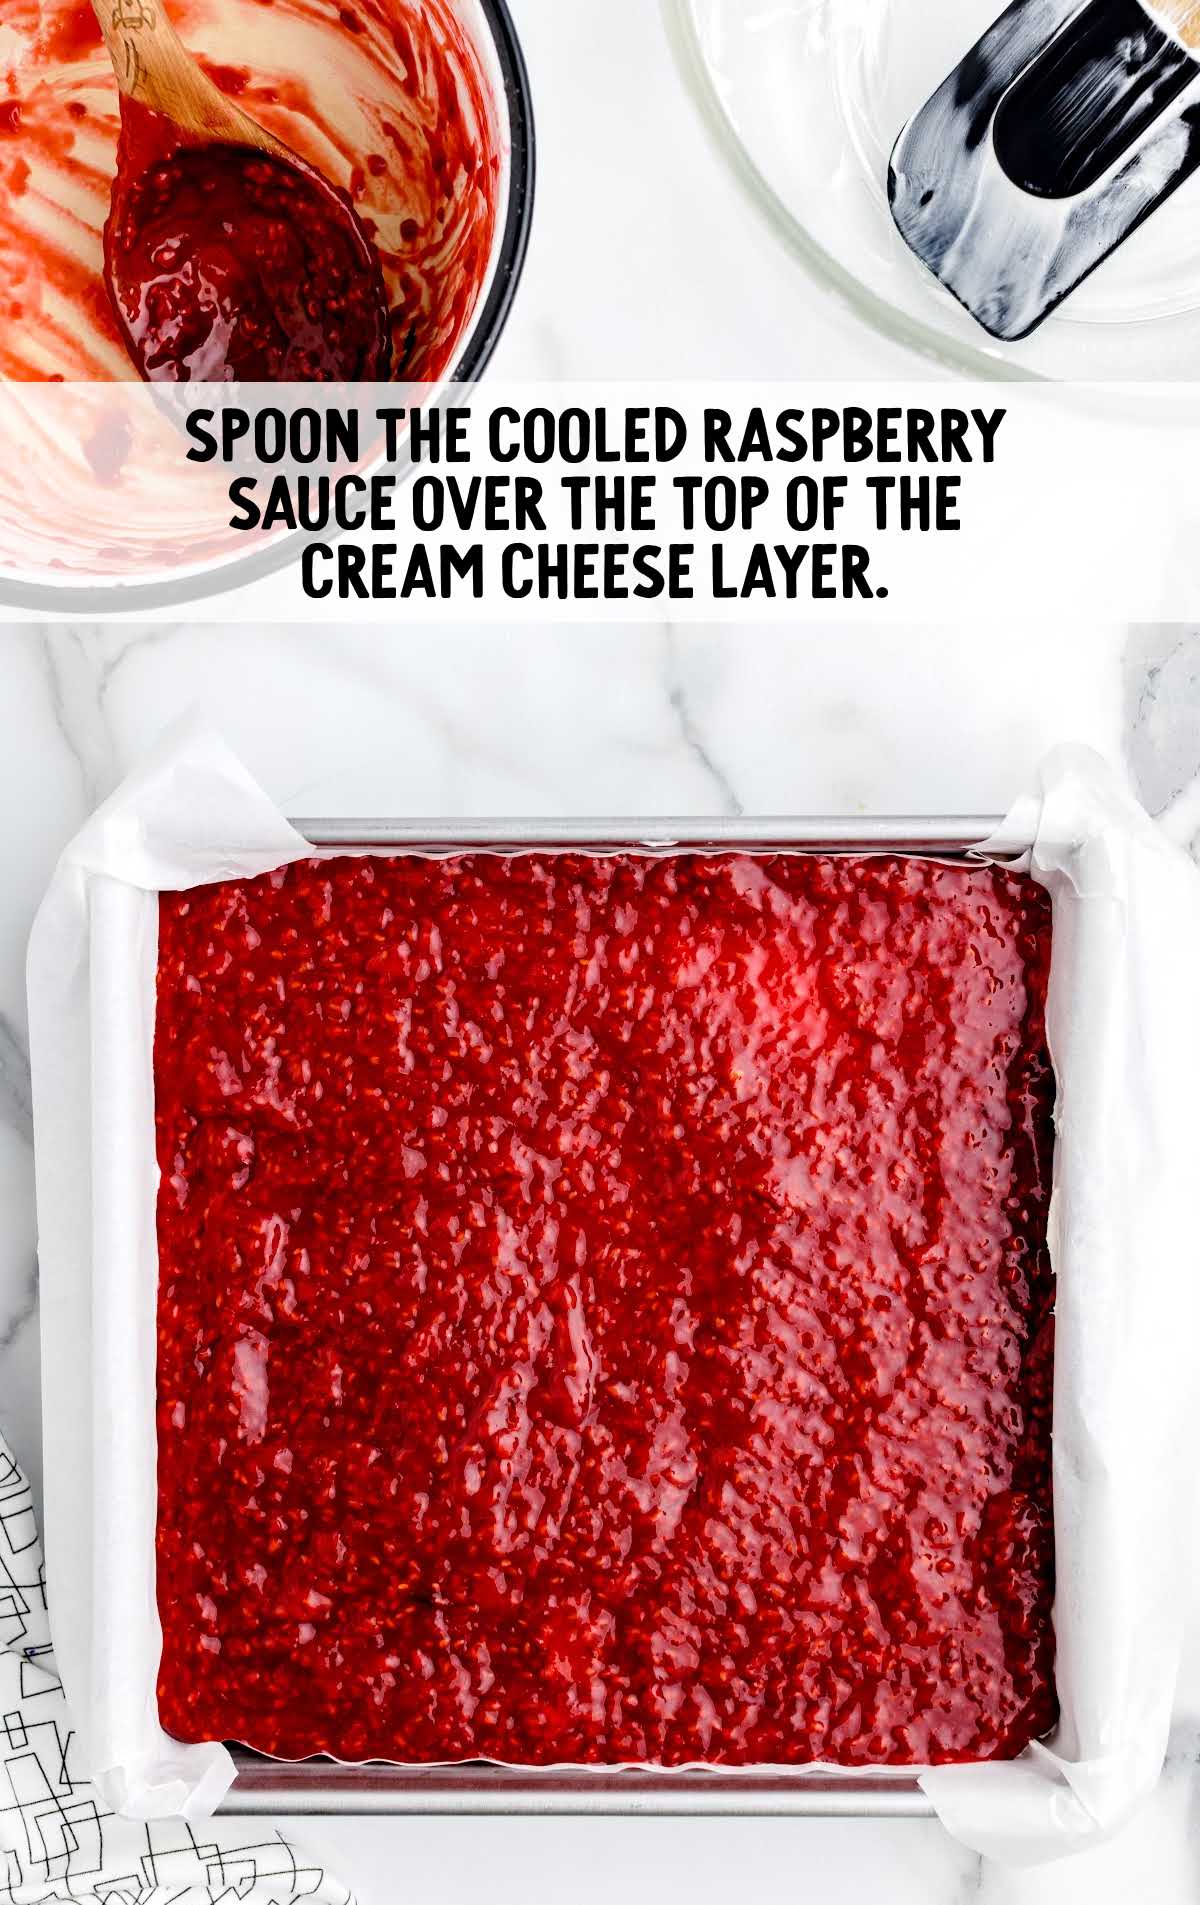 raspberry sauce spooned over the top of the cream cheese layer in a baking dish